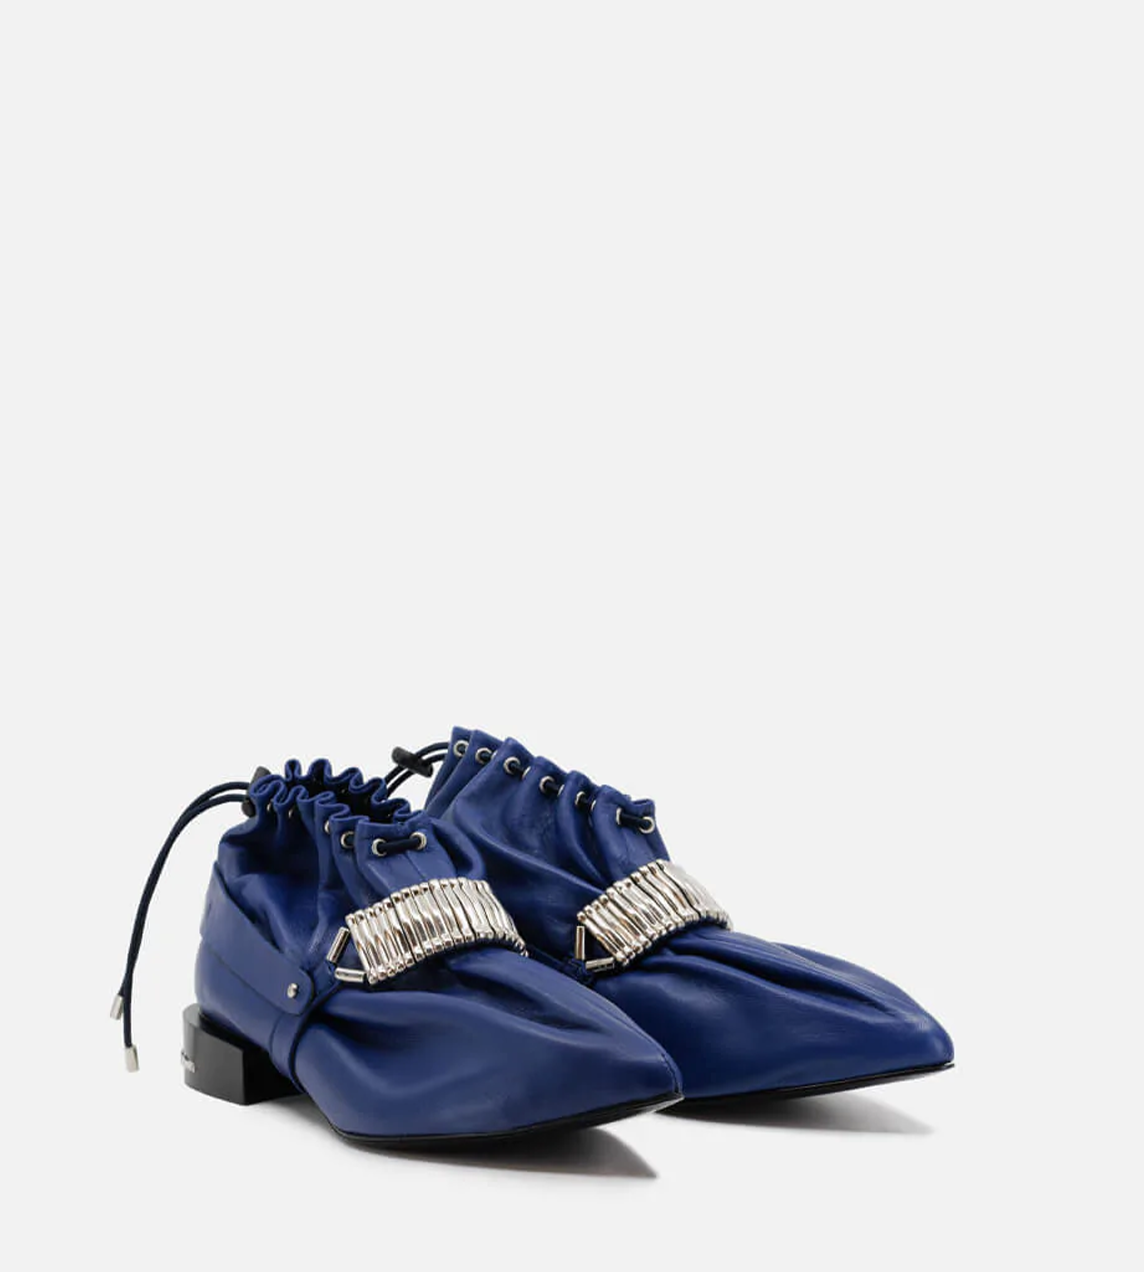 Toga Pulla - Drawstring Ankle Detail Shoe in Blue